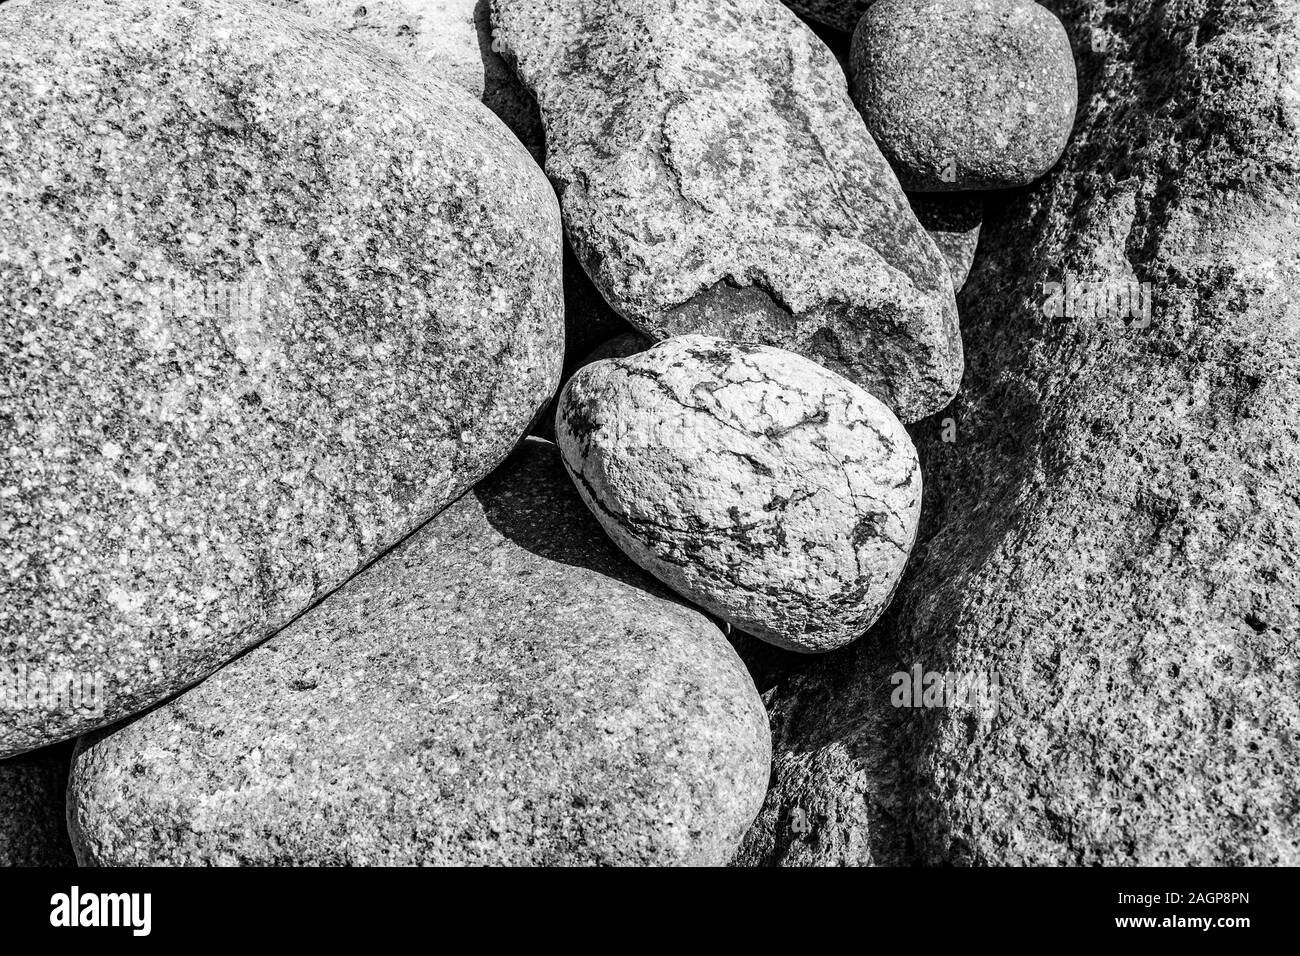 Rocks and stones in various sizes, shapes, and textures photographed in Sengamnon beach, Japan Stock Photo